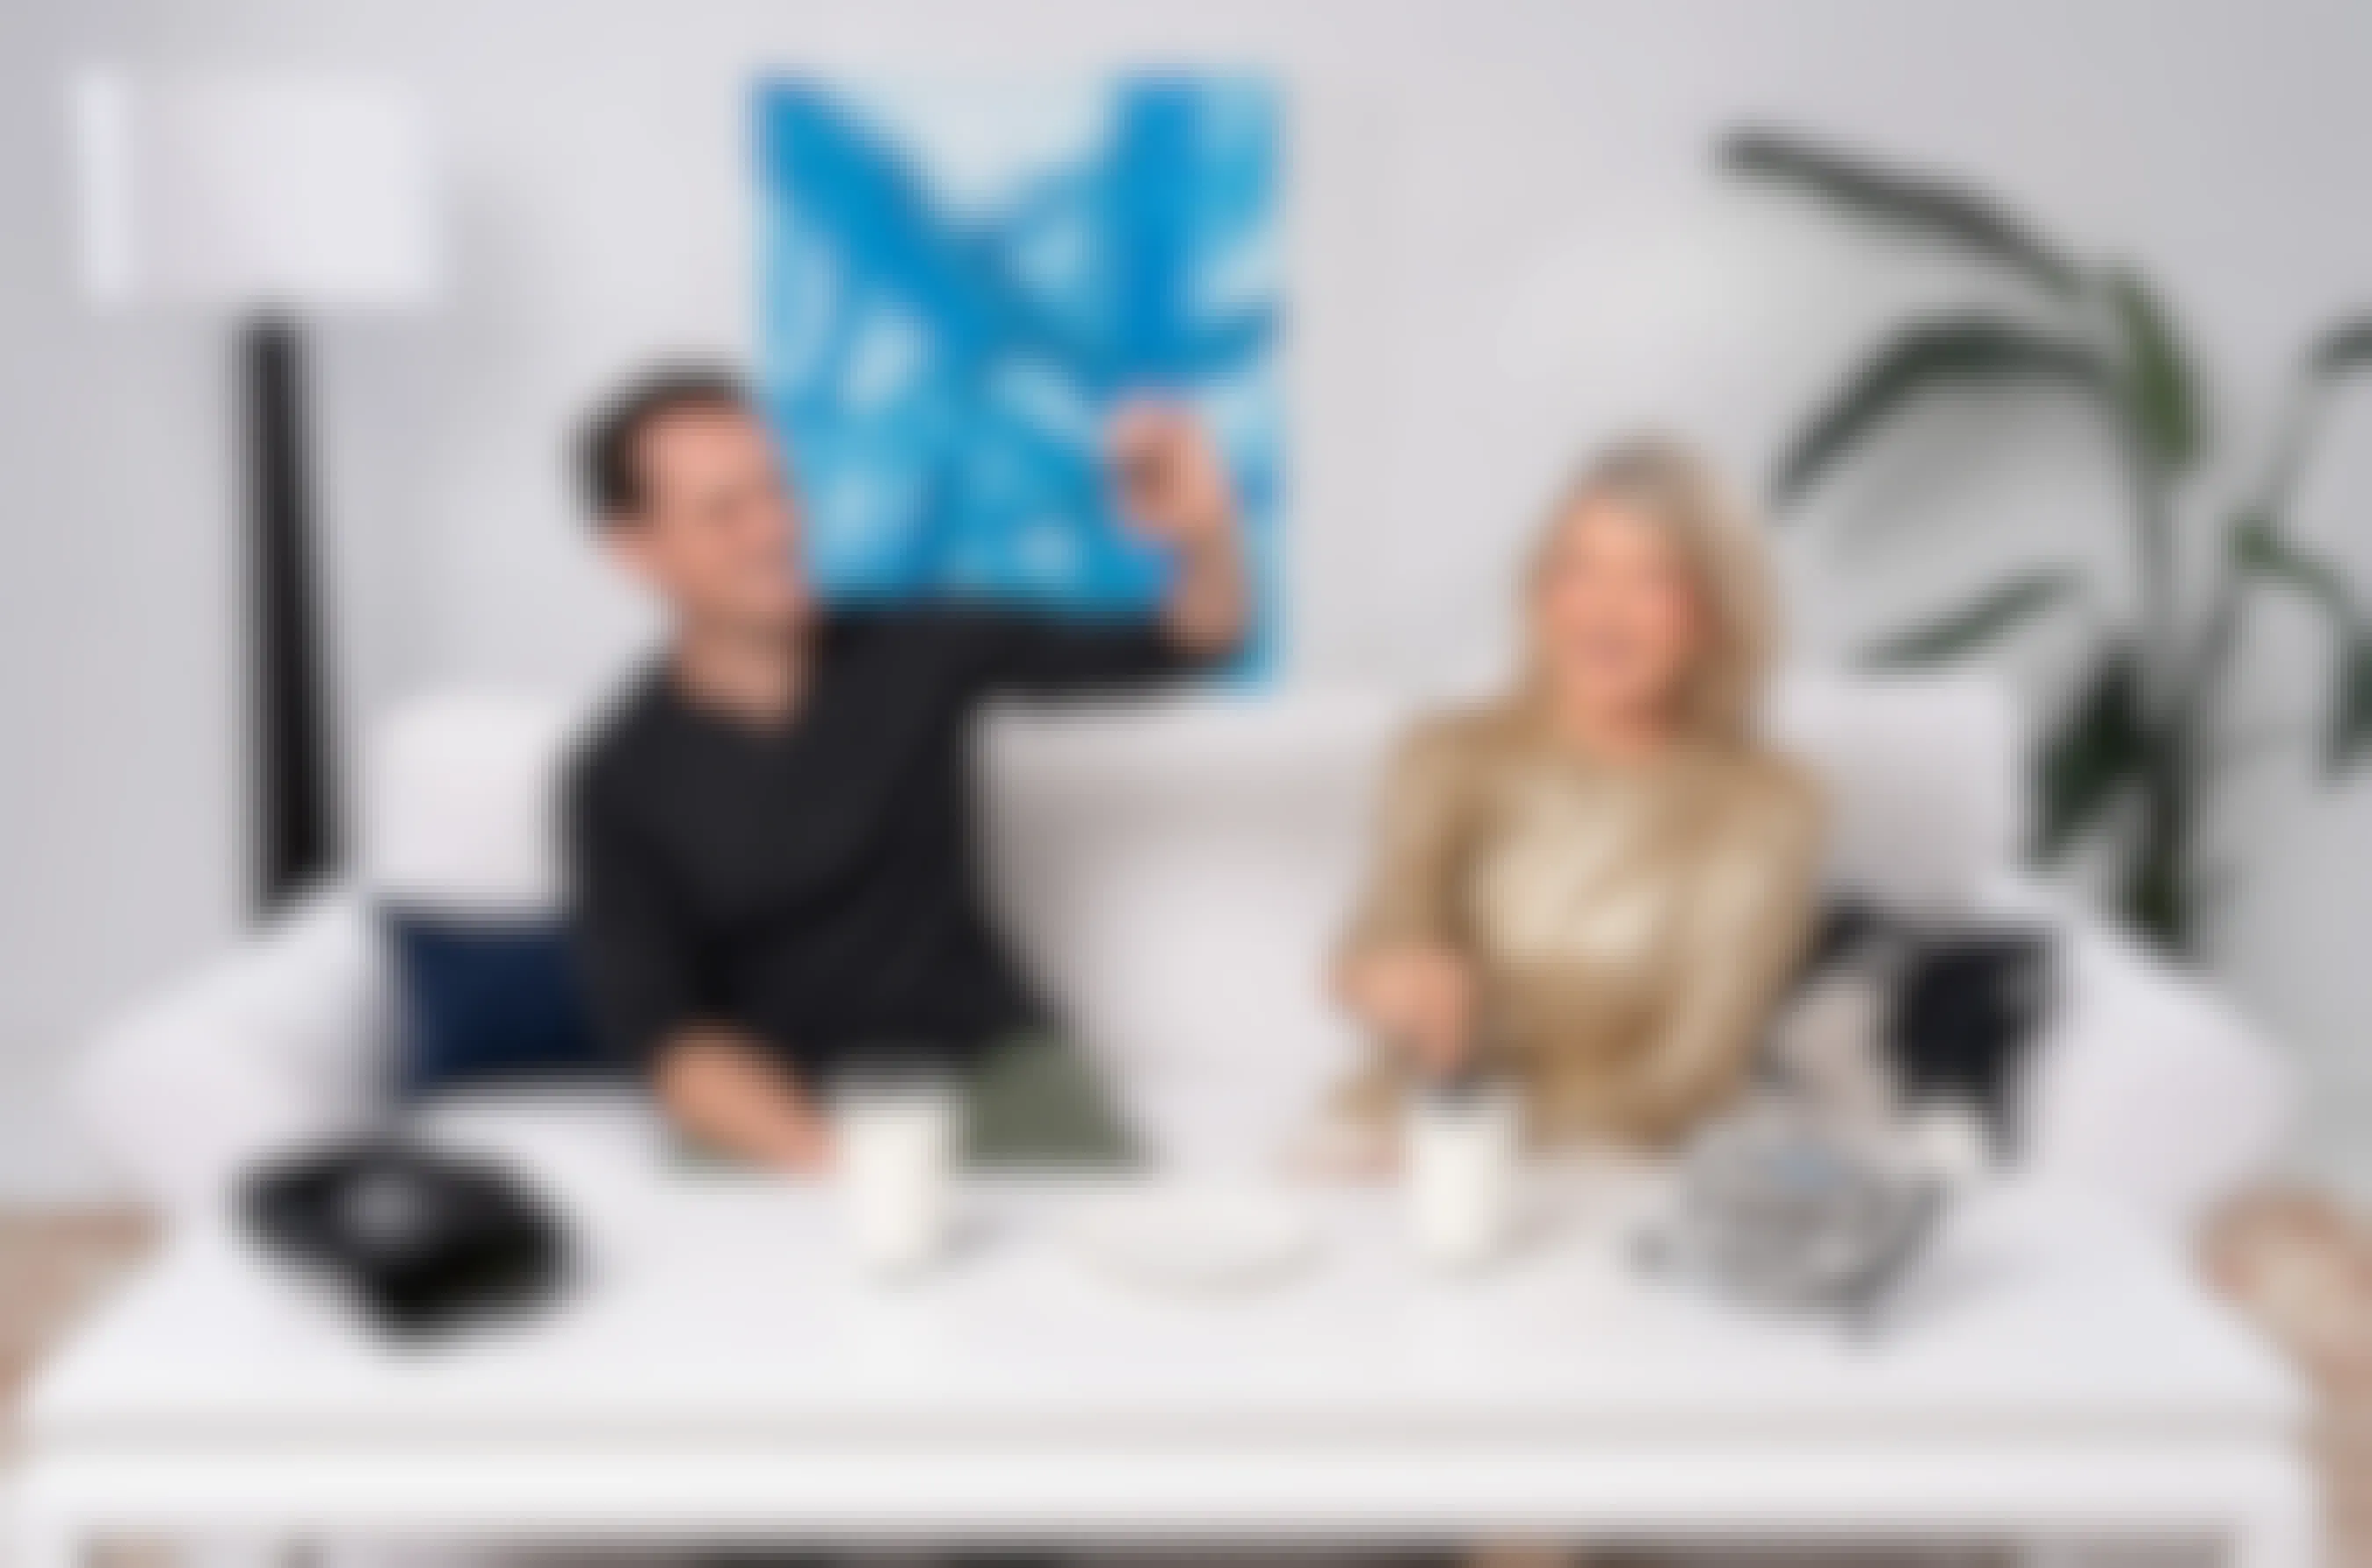 Martha Stewart and Ryan McCallister sitting on a couch with a The Most OREO OREO package and a VR headset.